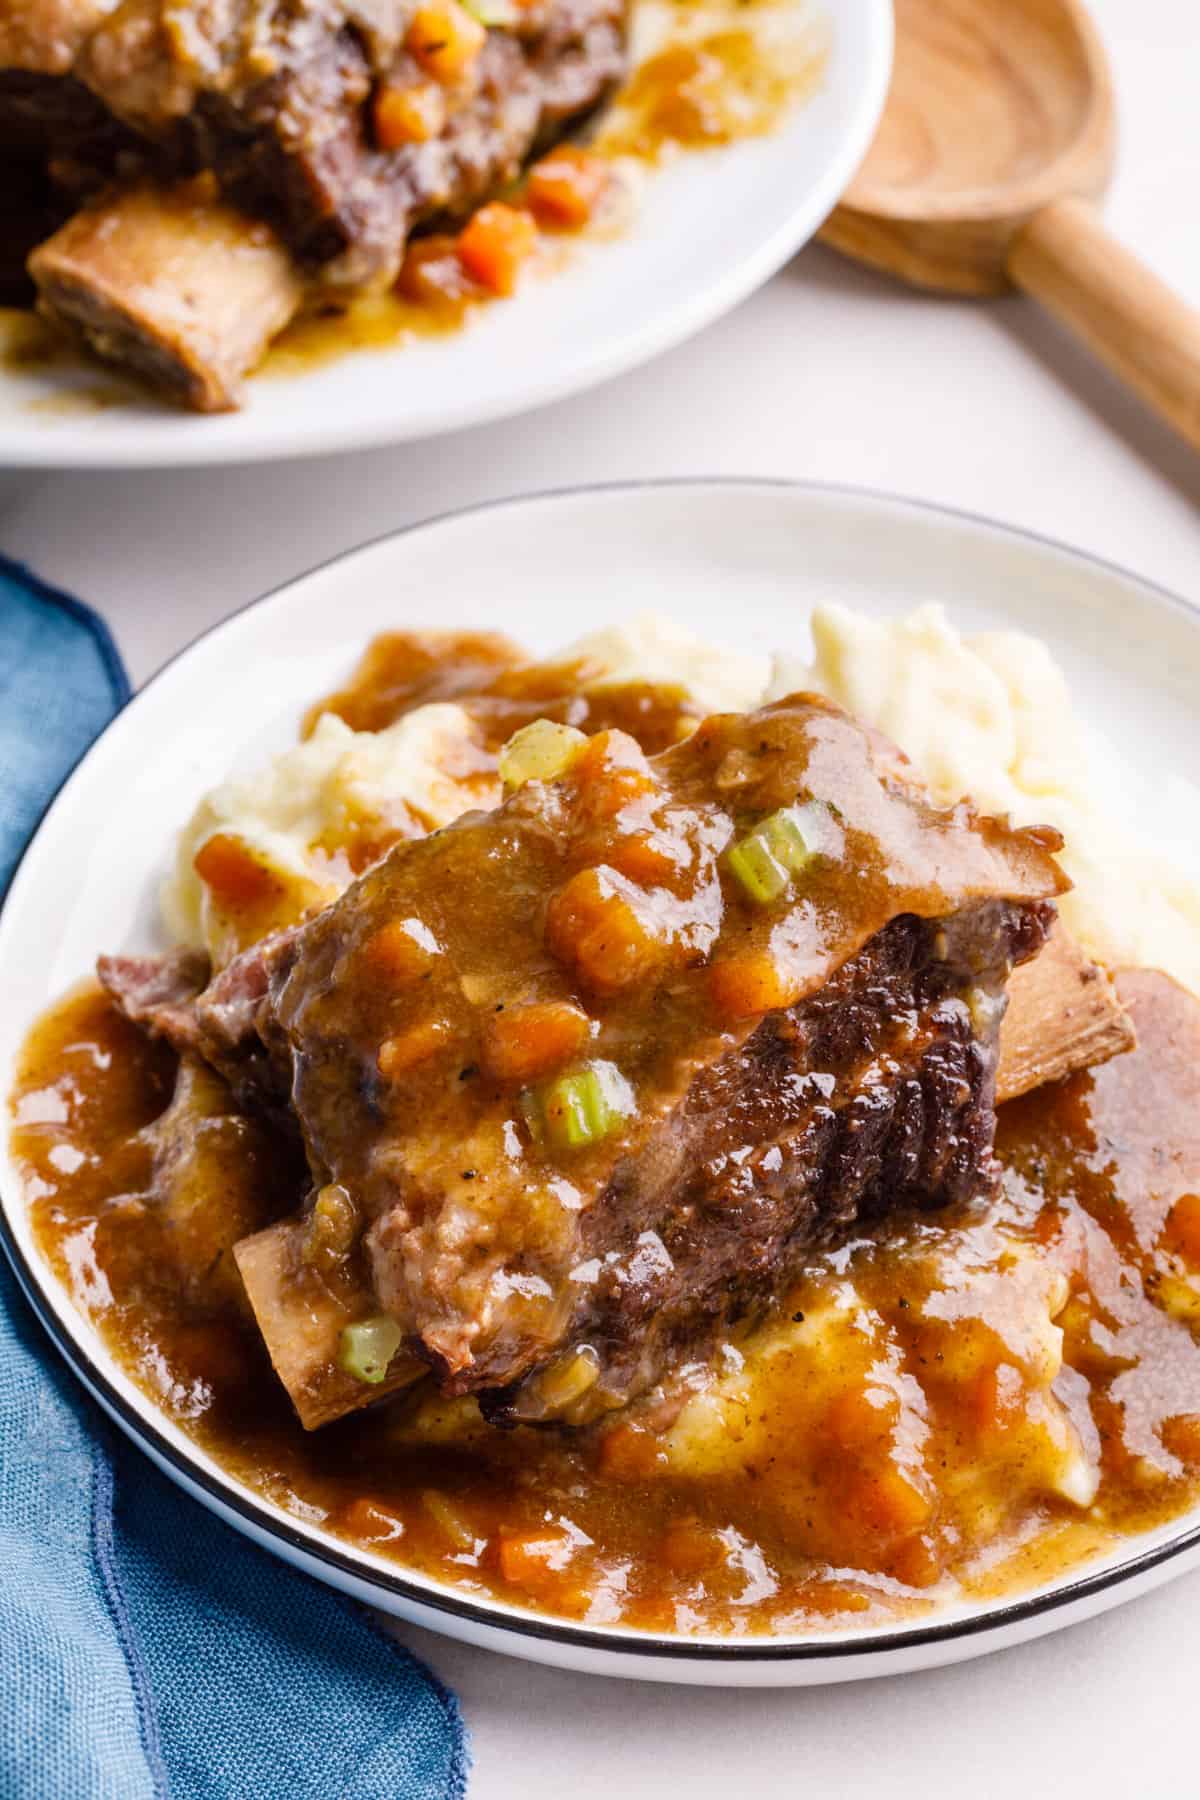 close up image of a plate of mashed potatoes, instant pot short ribs and gravy